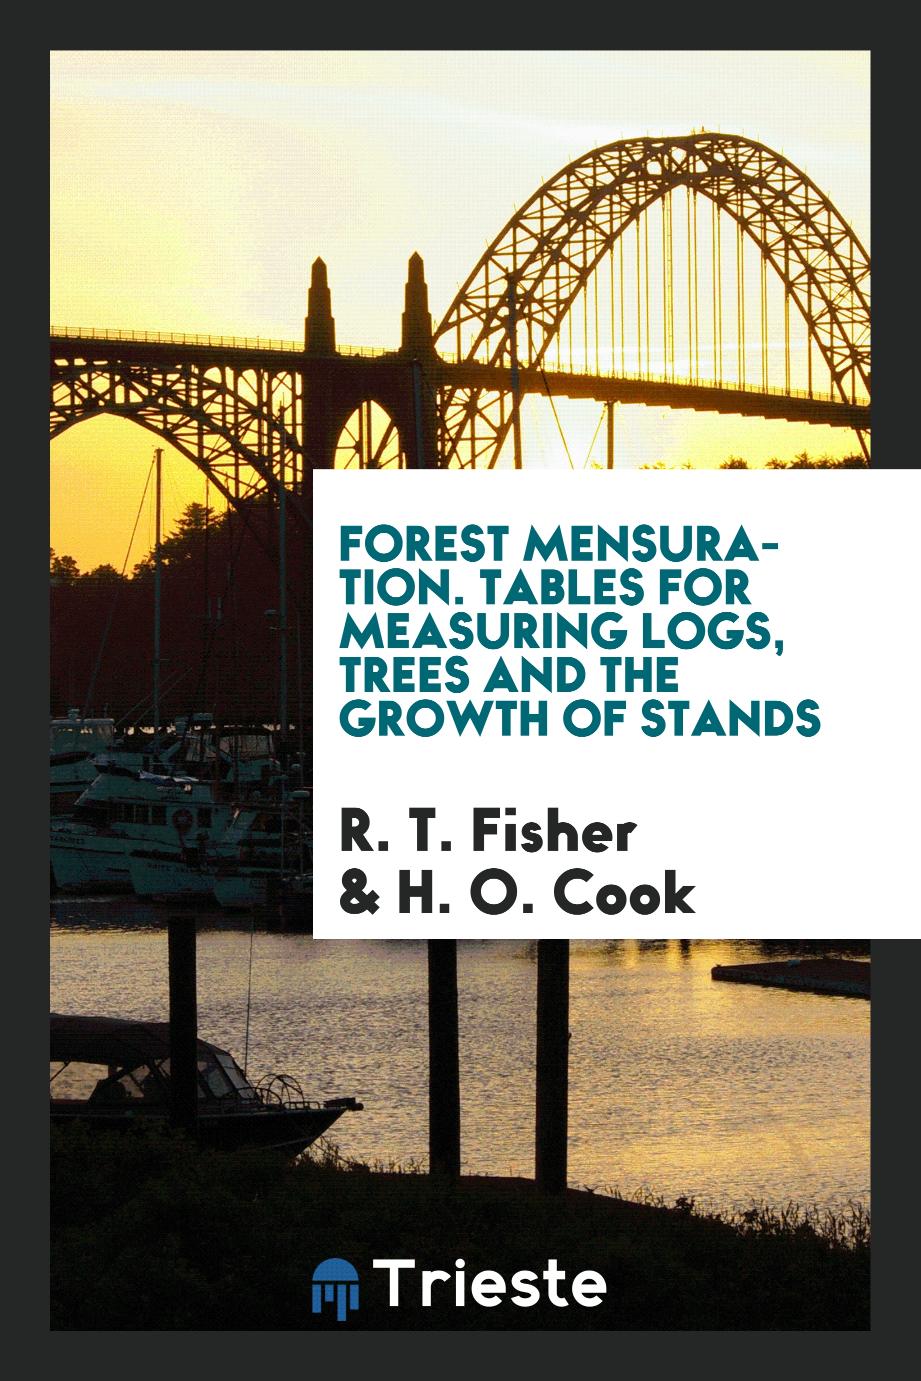 R. T. Fisher, H. O. Cook - Forest mensuration. Tables for measuring logs, trees and the growth of stands